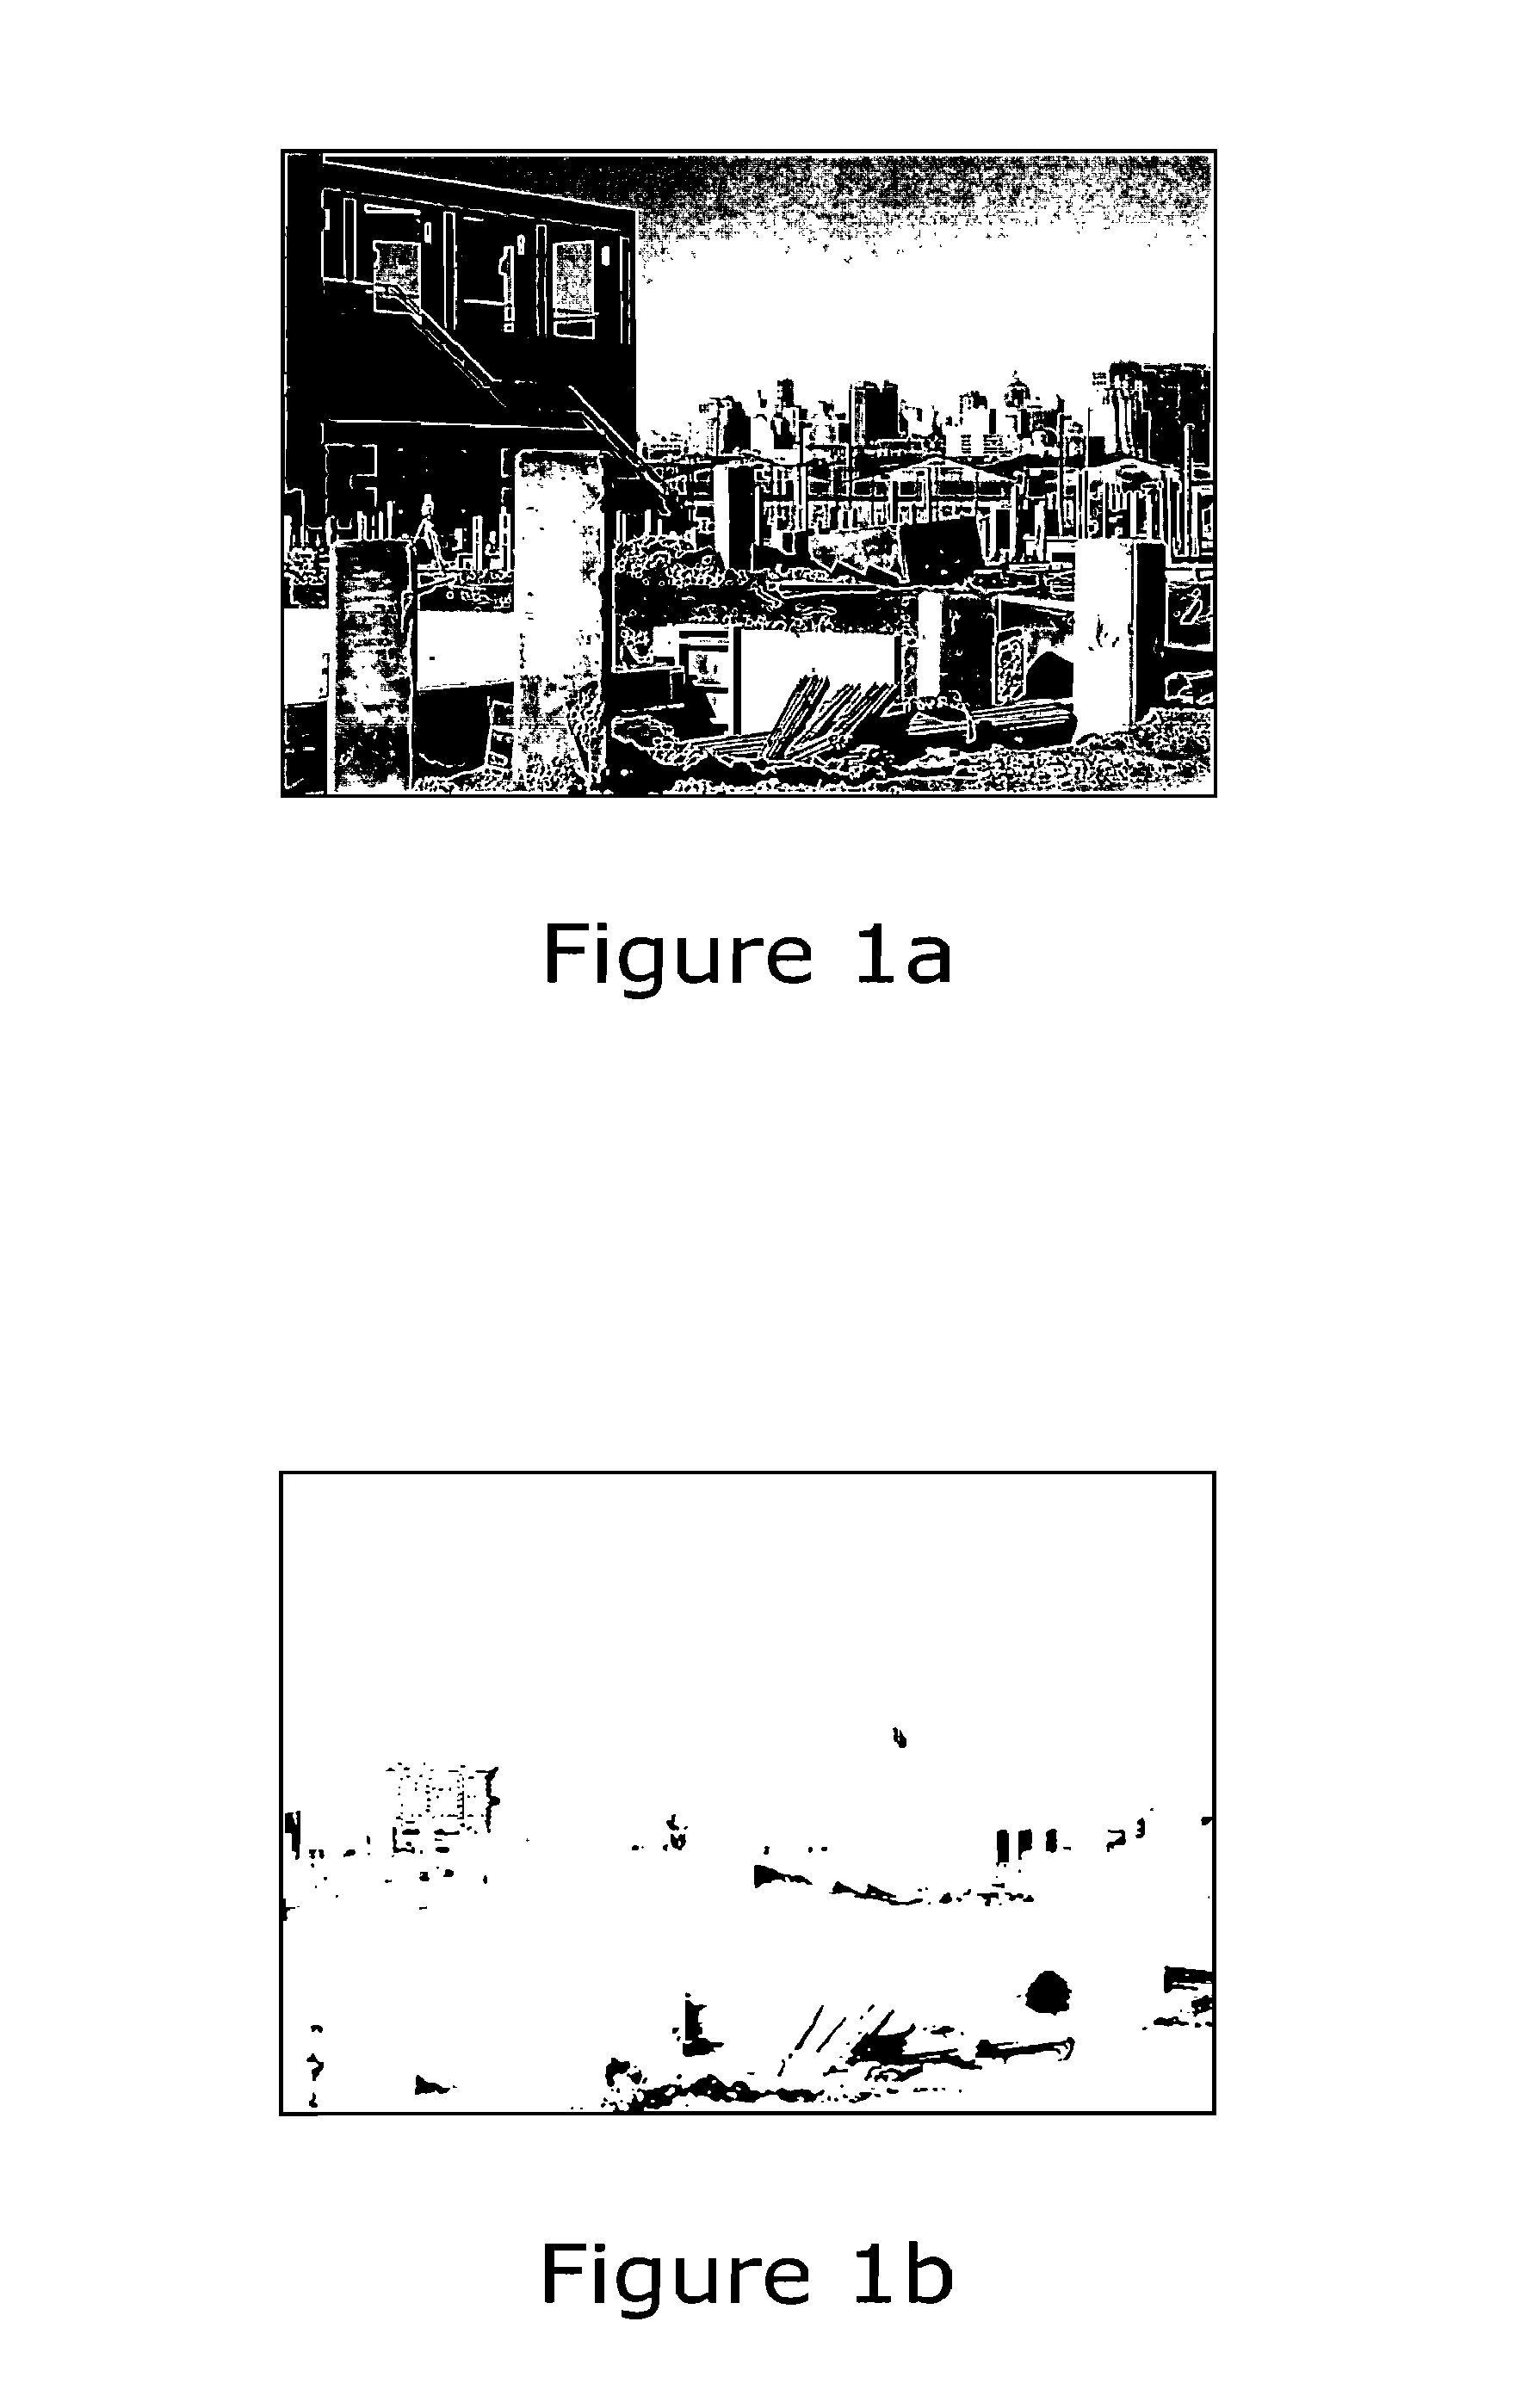 Hierarchical static shadow detection method